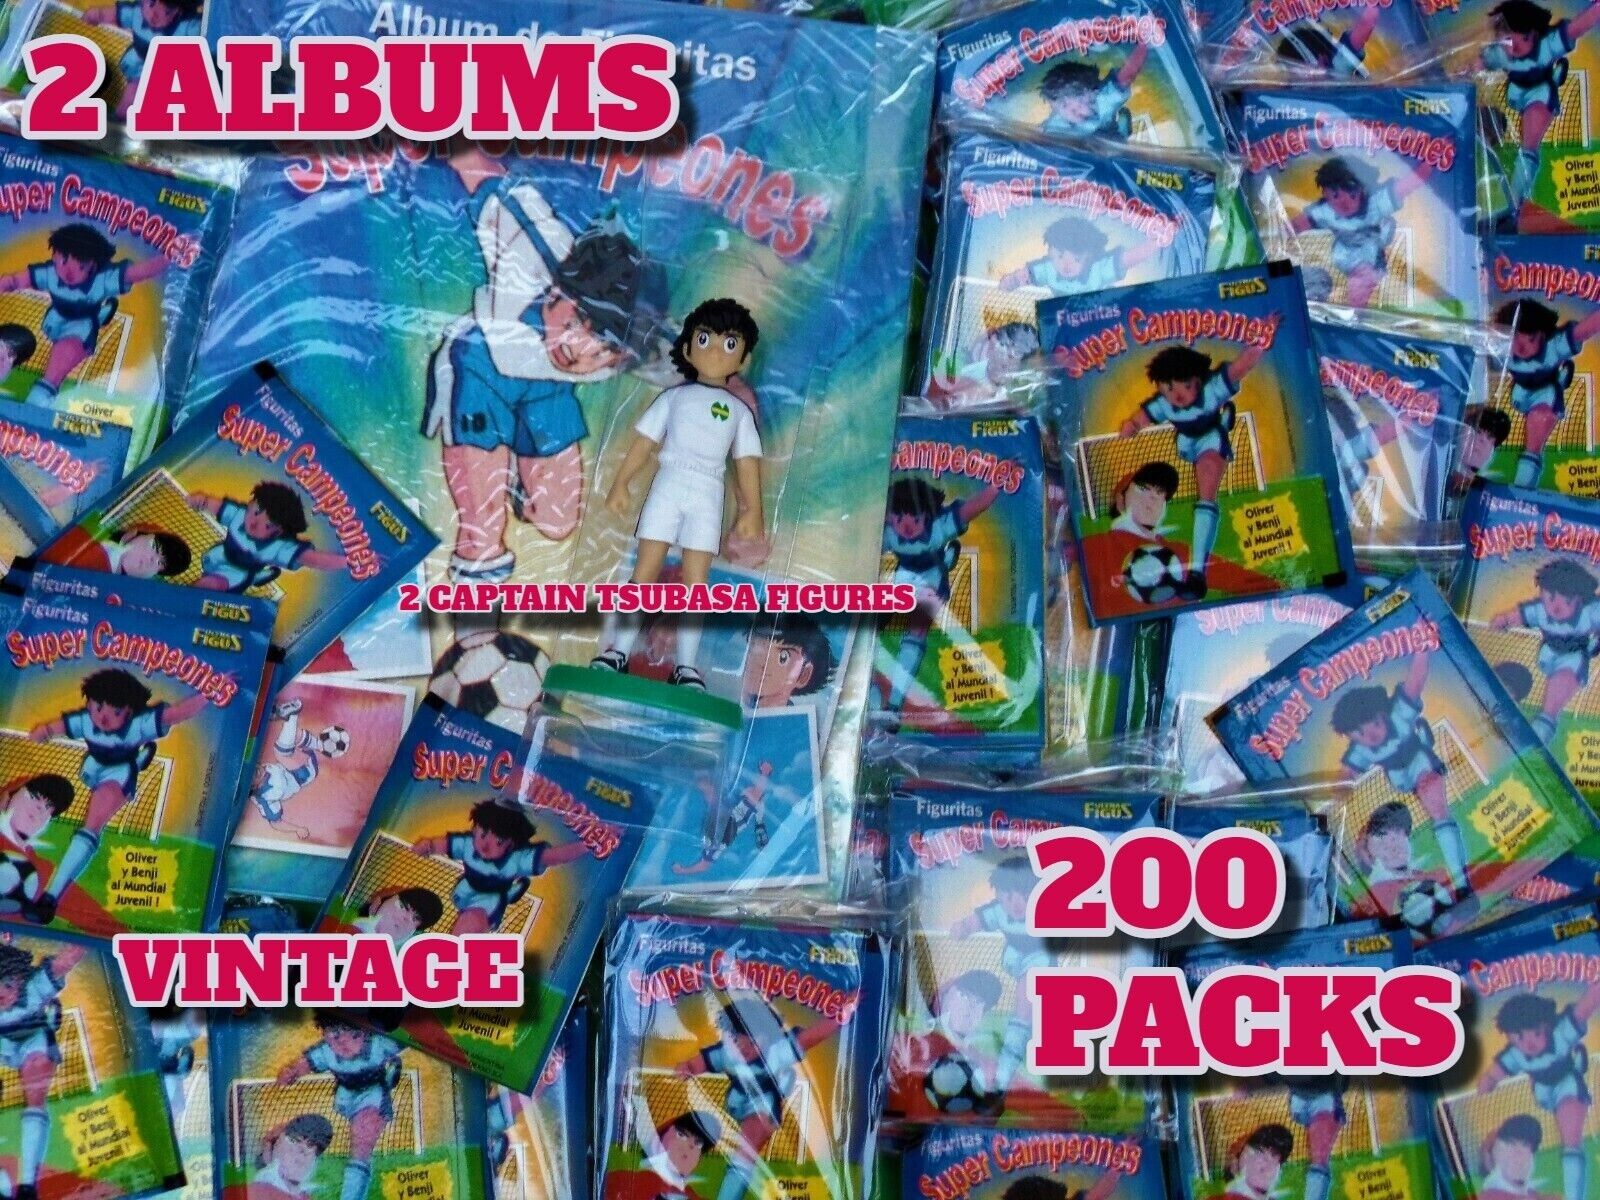 Captain Tsubasa,  2 Figures , 200 Vintage Packs StickerCards  And 2 Albums